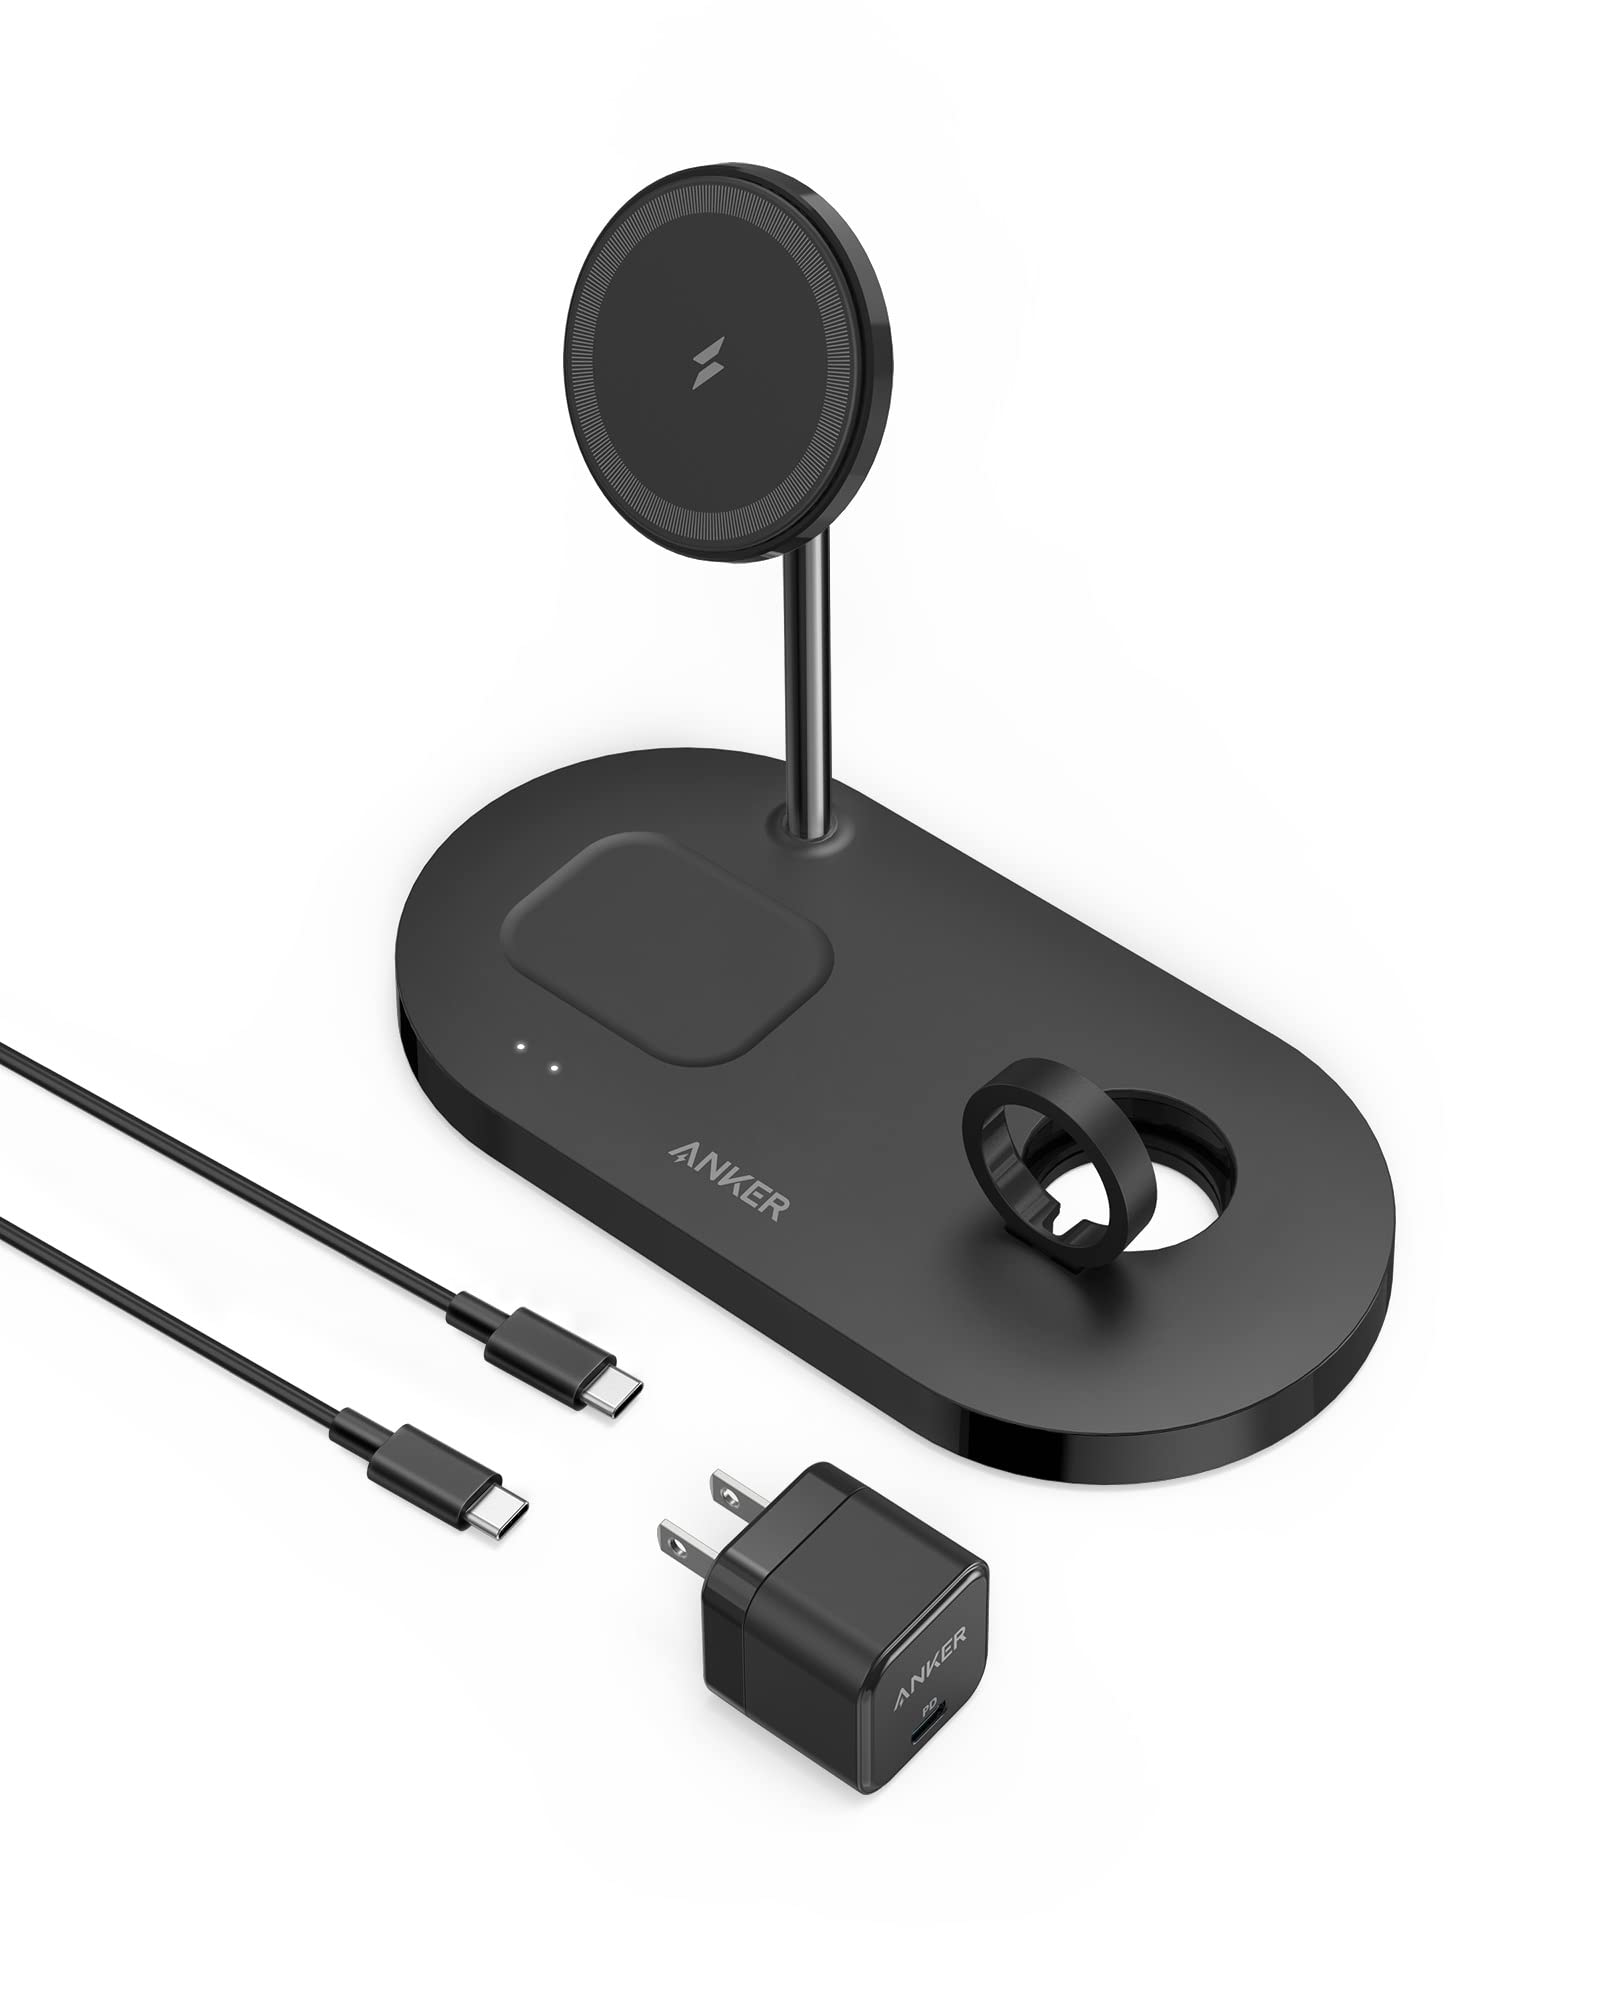 Anker 533 Magnetic Wireless Charger (3-in-1 Stand) (マグネット式3-in-1 ワイヤレス充電ステーション) 【マグネット式/ワイヤレス出力/USB急速充電器付属】iPhone 15 / 14 / 13 / 12 シリーズ専用 Apple Watch 各種対応